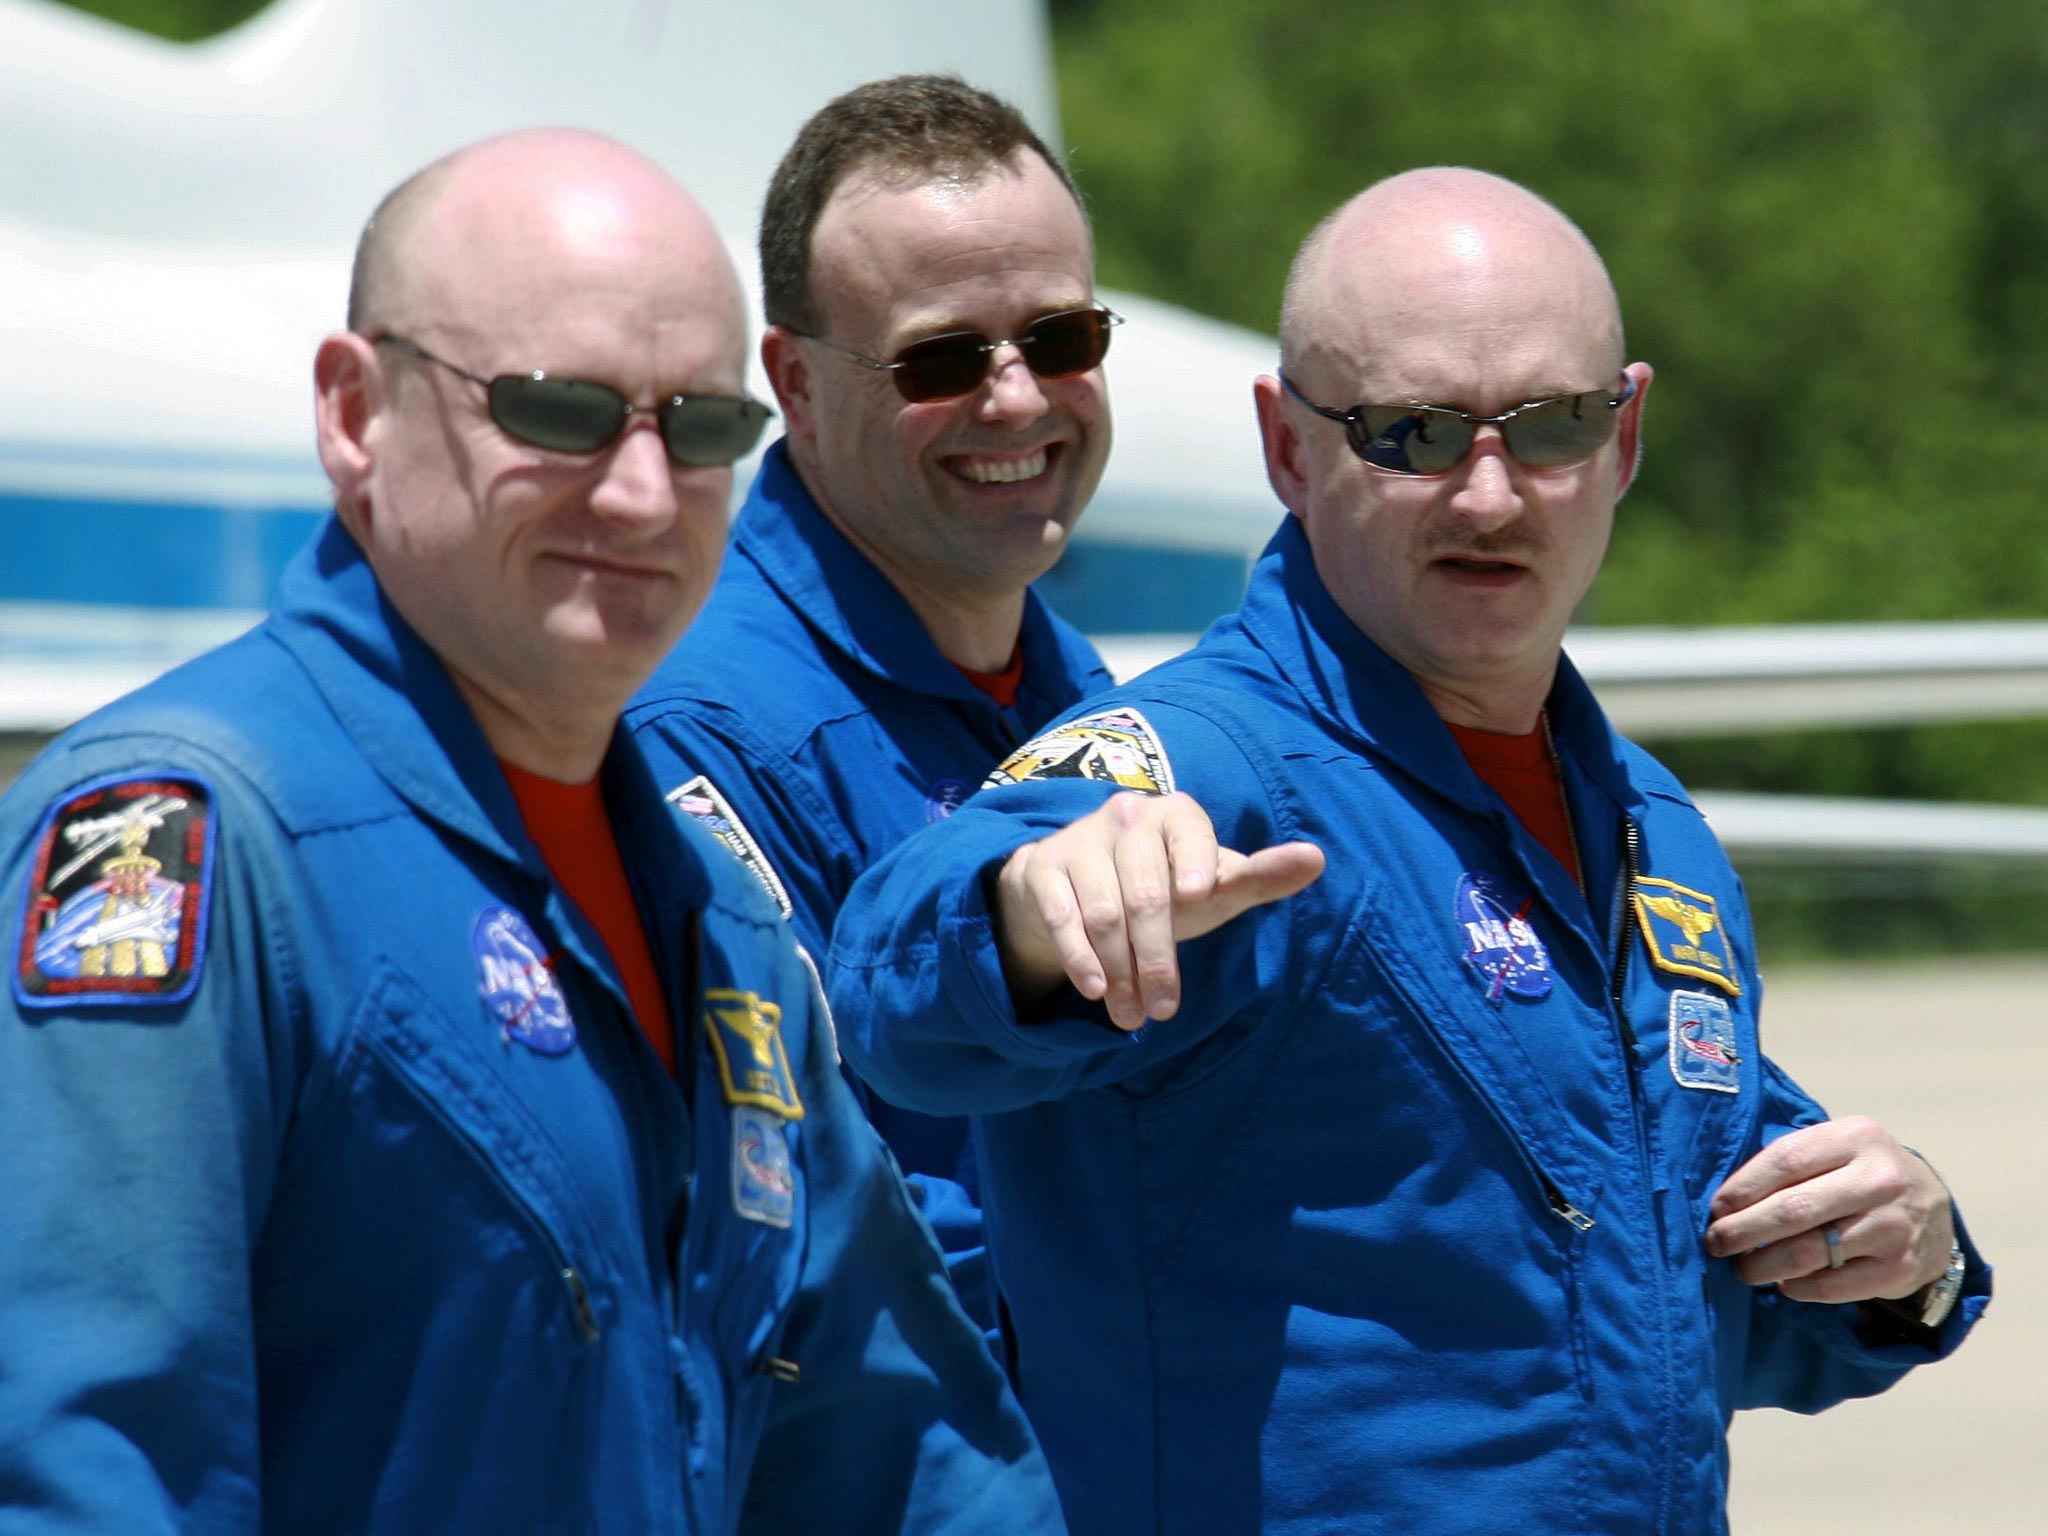 Shuttle Discovery commander Mark Kelly, right, gestures as he walks with his twin brother, astronaut Scott Kelly